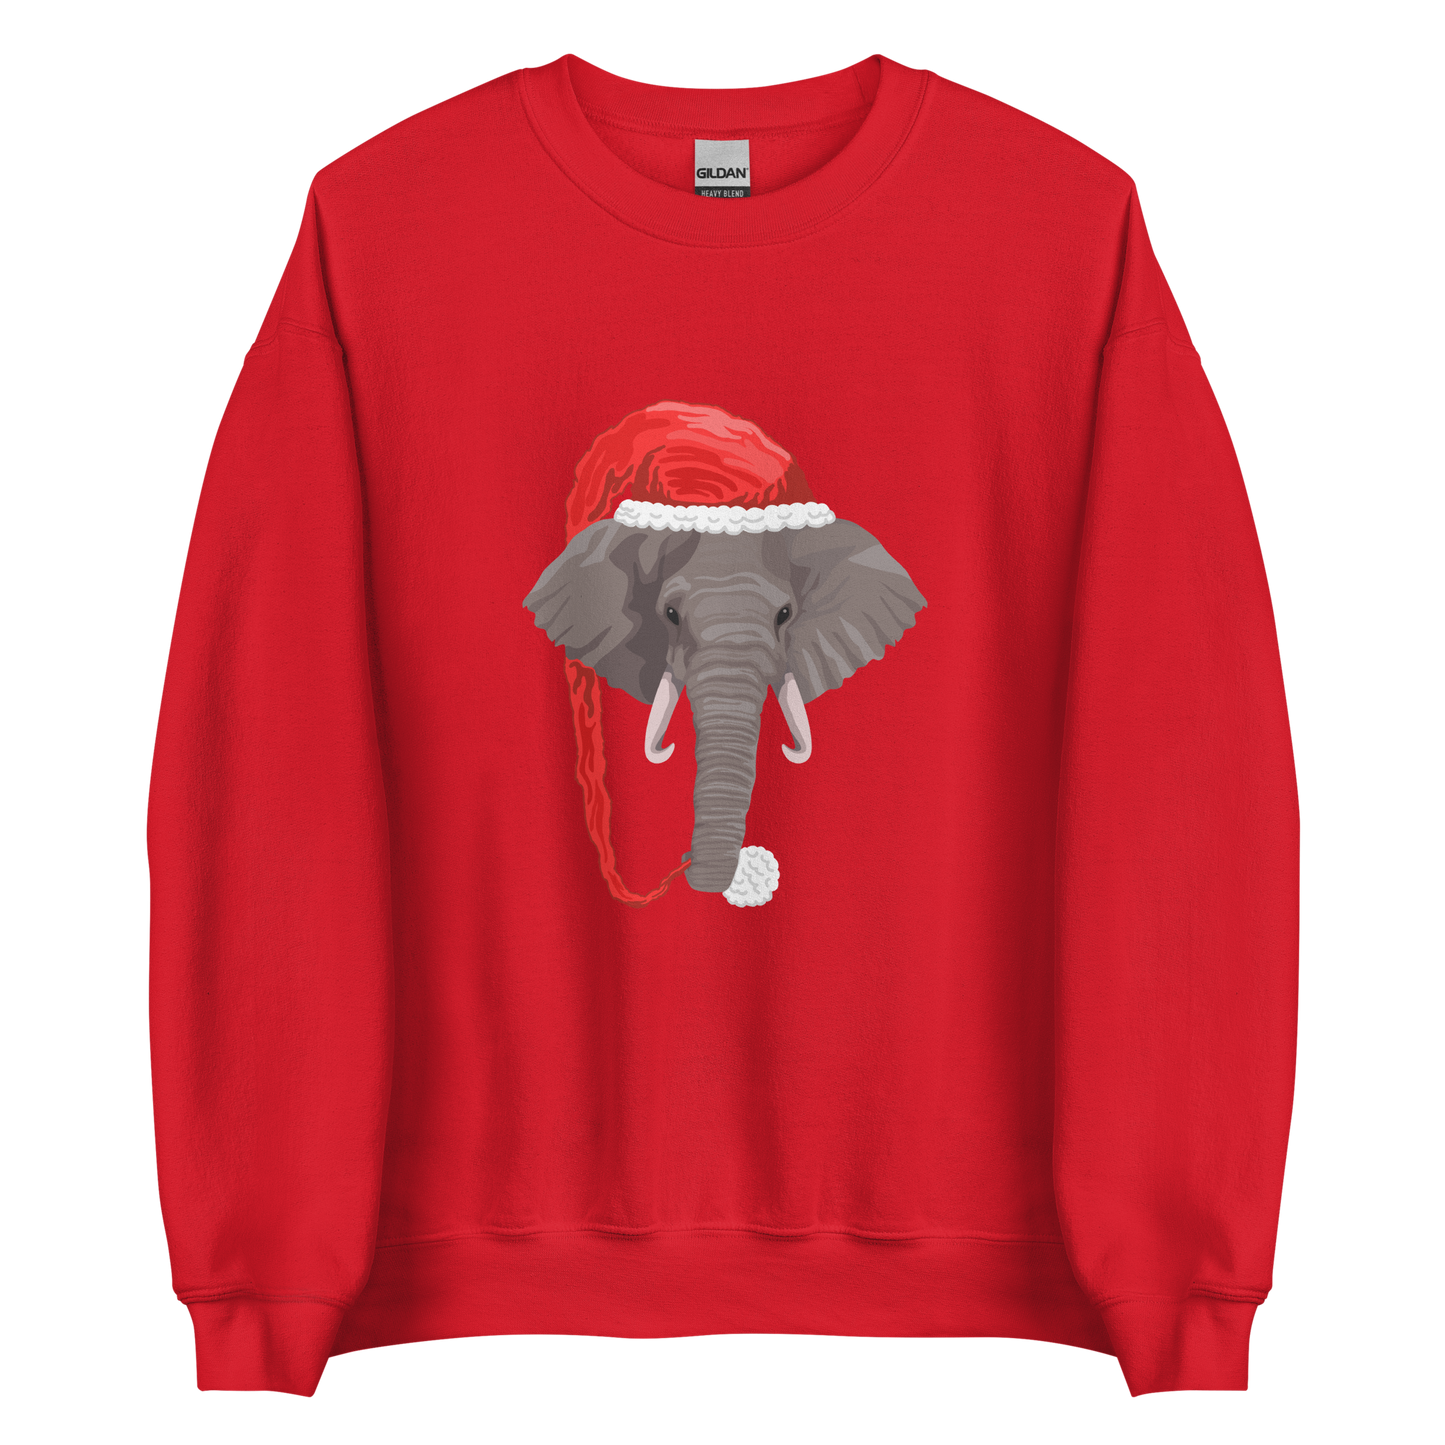 Red Christmas Elephant Sweatshirt featuring a delight Elephant Wearing an Elf Hat graphic on the chest - Funny Christmas Graphic Elephant Sweatshirts - Boozy Fox